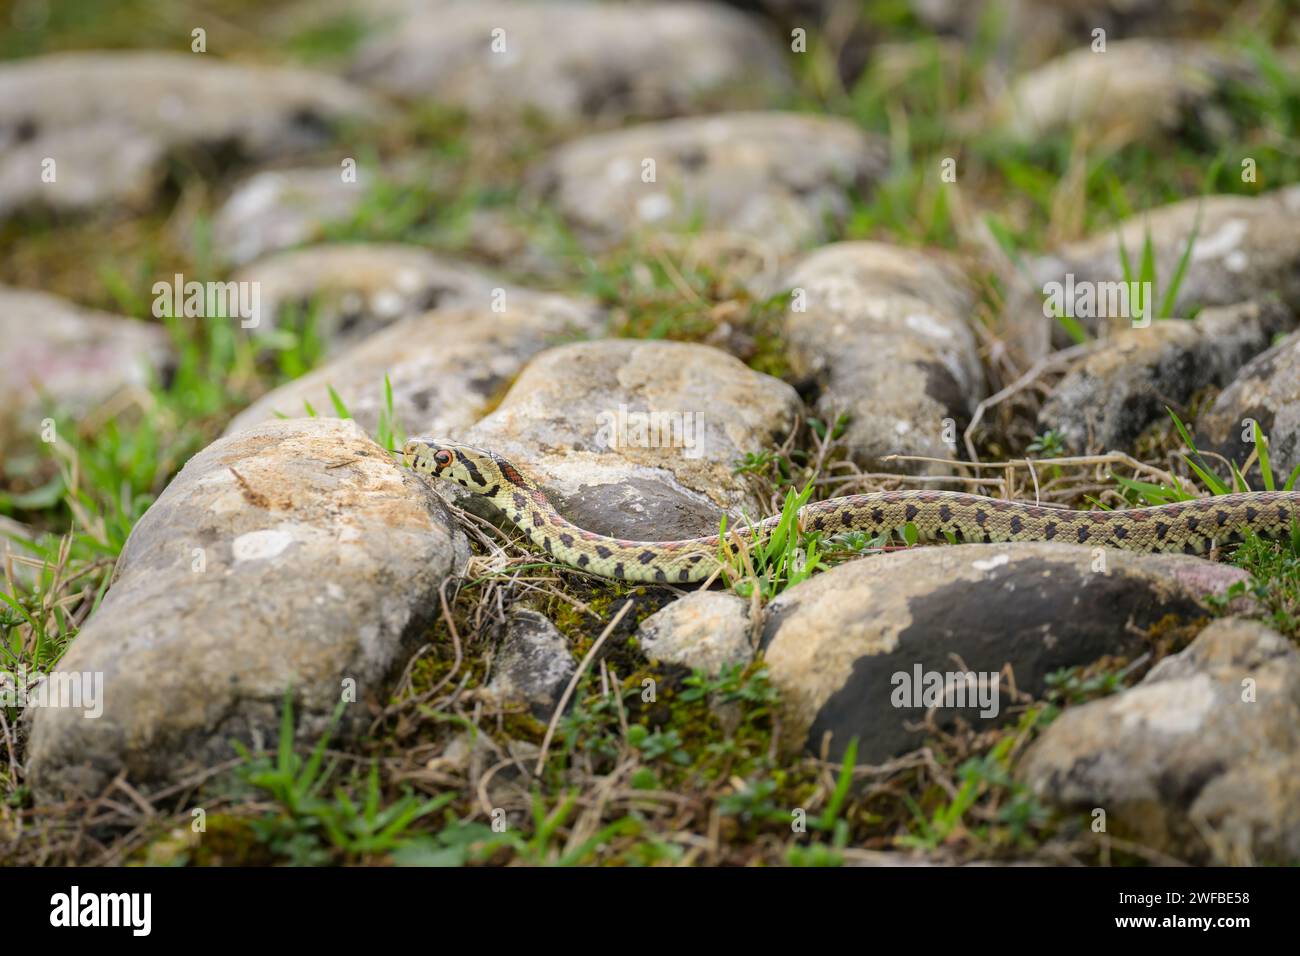 A young leopard snake resting on the ground, cloudy day in autumn, Cres (Croatia) Stock Photo